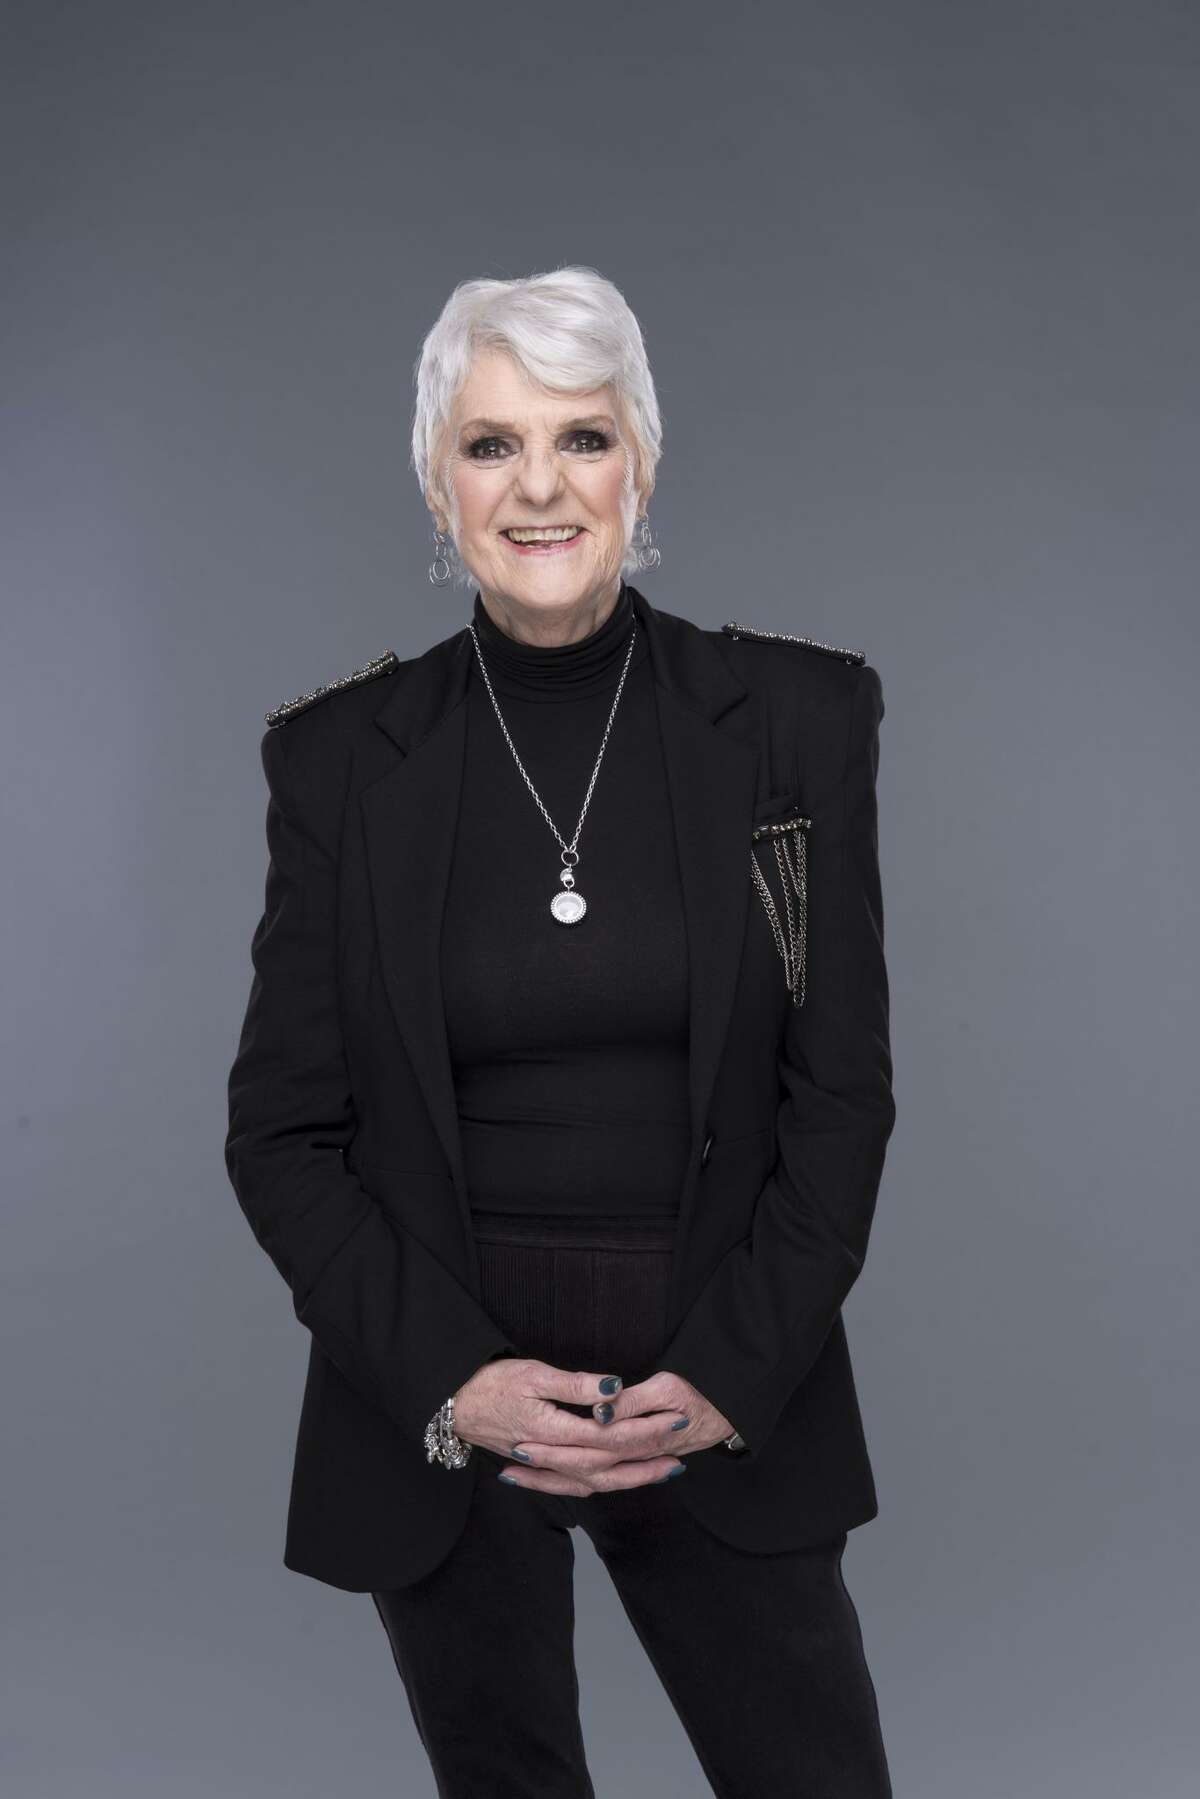 Sue Aitchison, WWE’s senior director of talent relations, is the recipient of WWE’s 2019 Warrior Award.